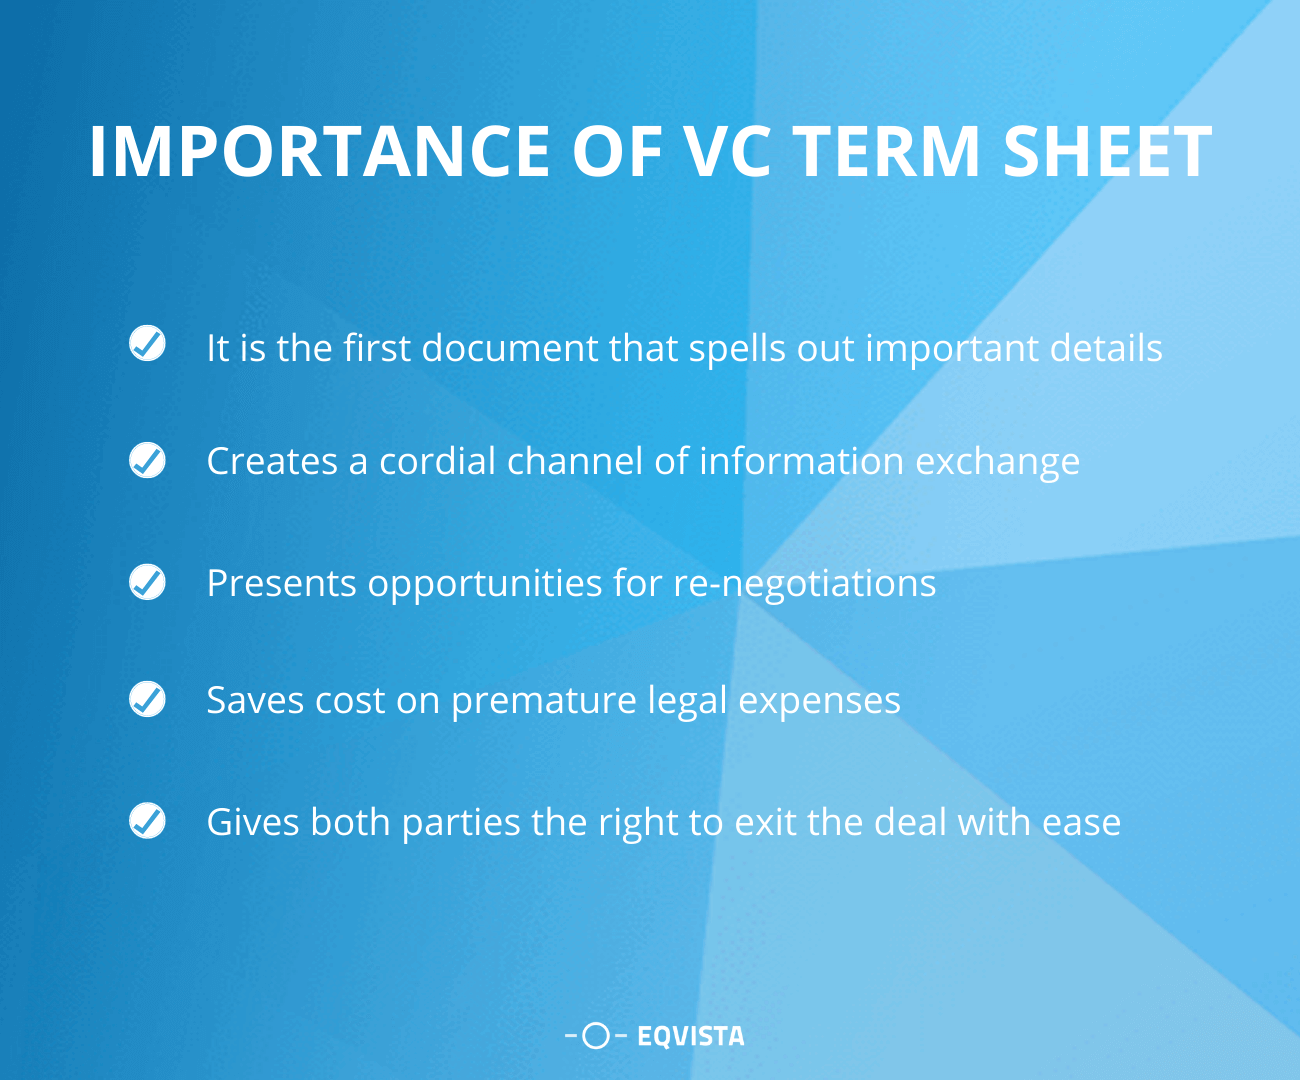 Importance of VC Term Sheet